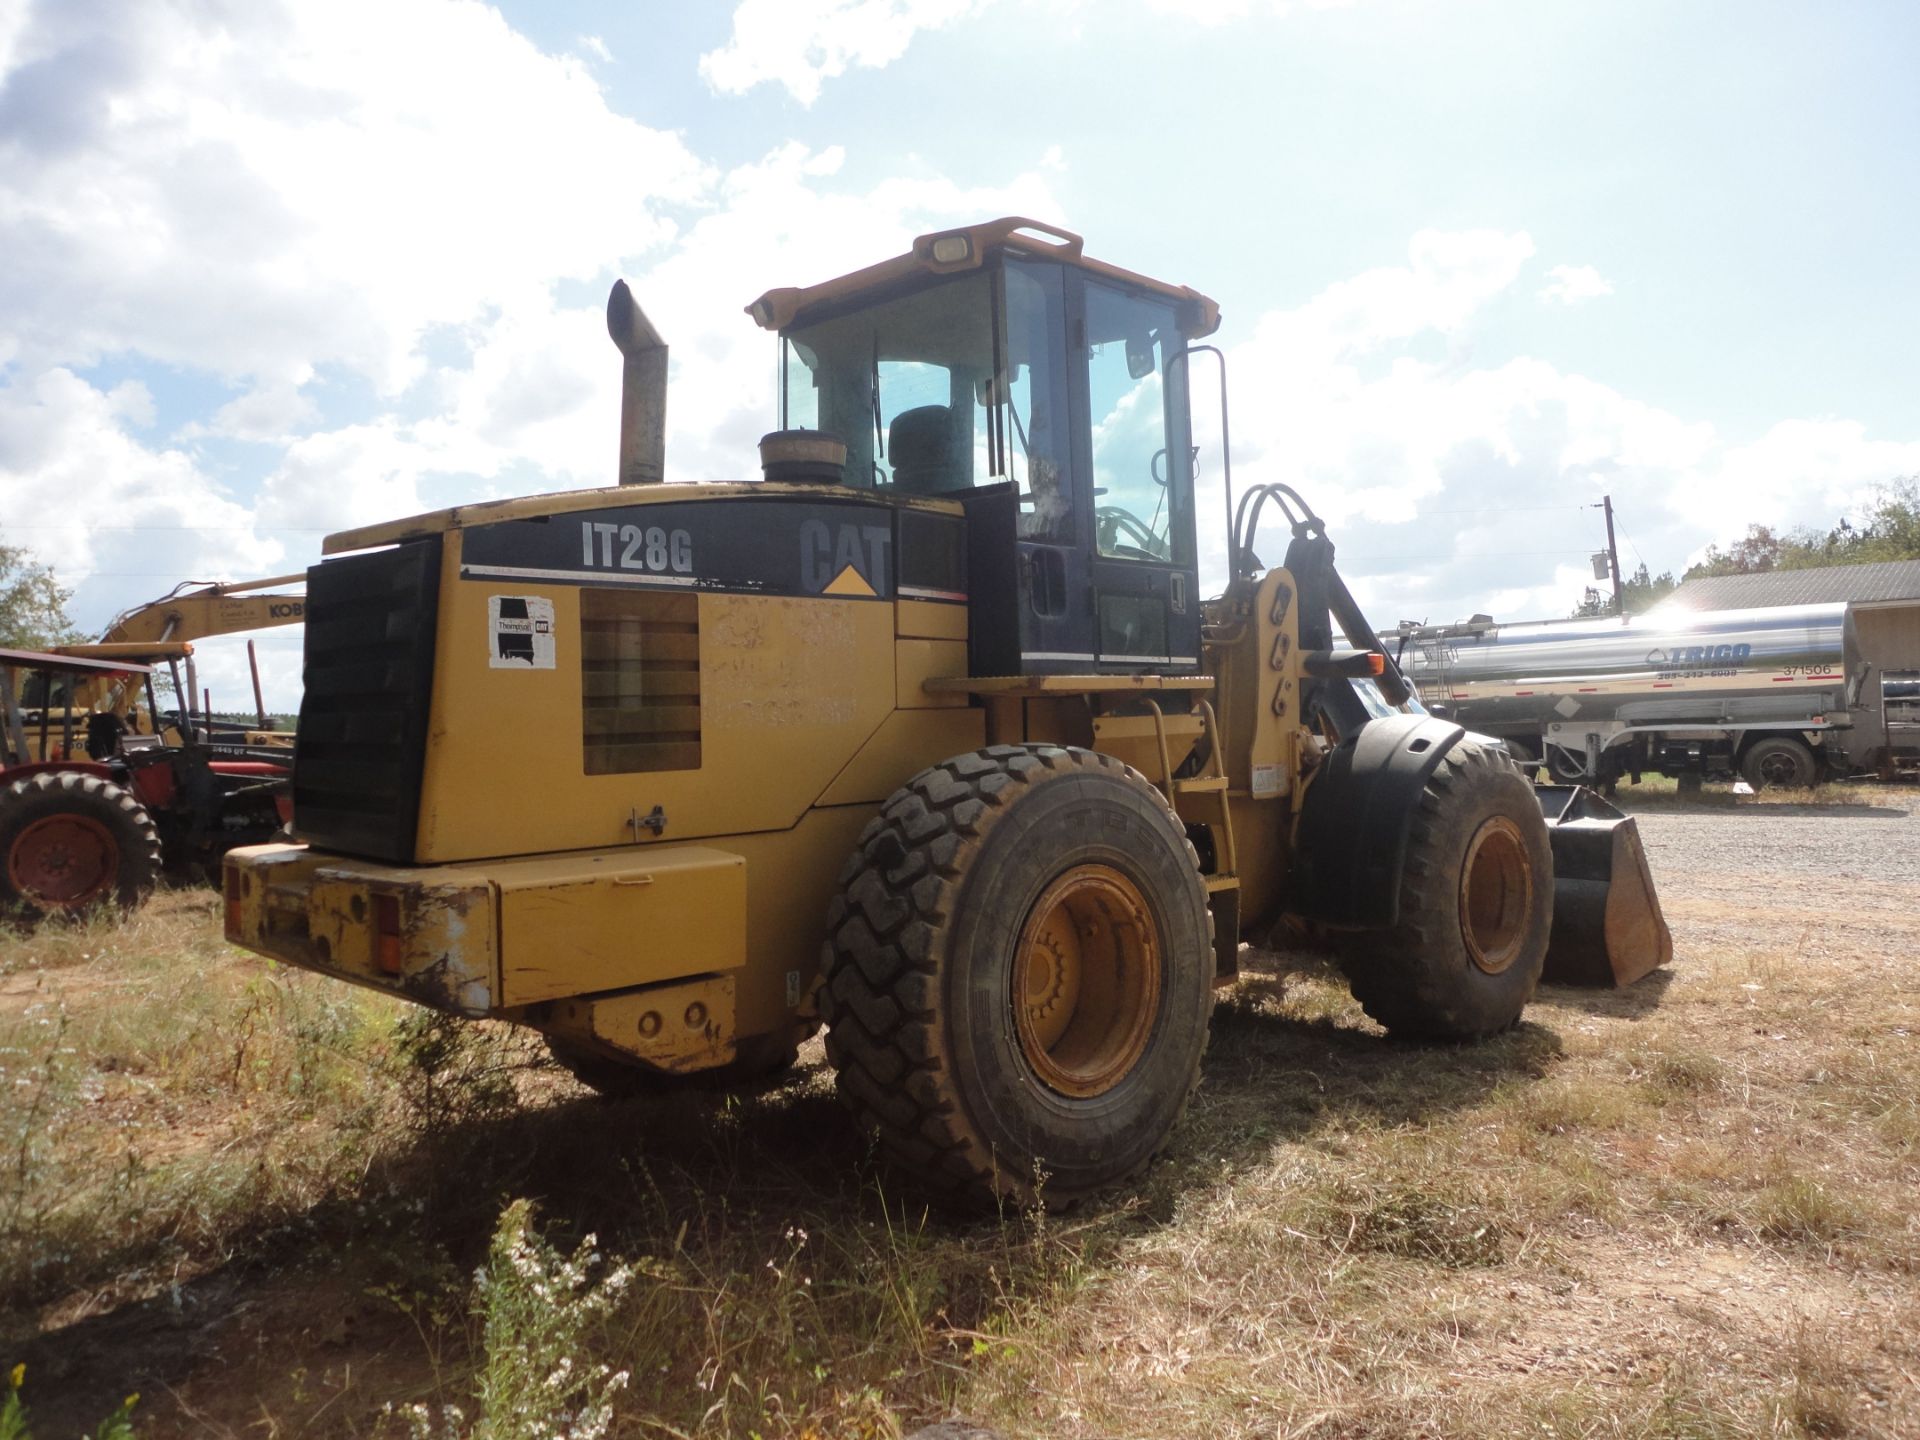 CATERPILLAR MODEL IT28G ENCLOSED CAB RUBBER TIRE LOADER W/ BUCKET; S/N X8CR02619X, 10,638 HOURS - Image 3 of 8